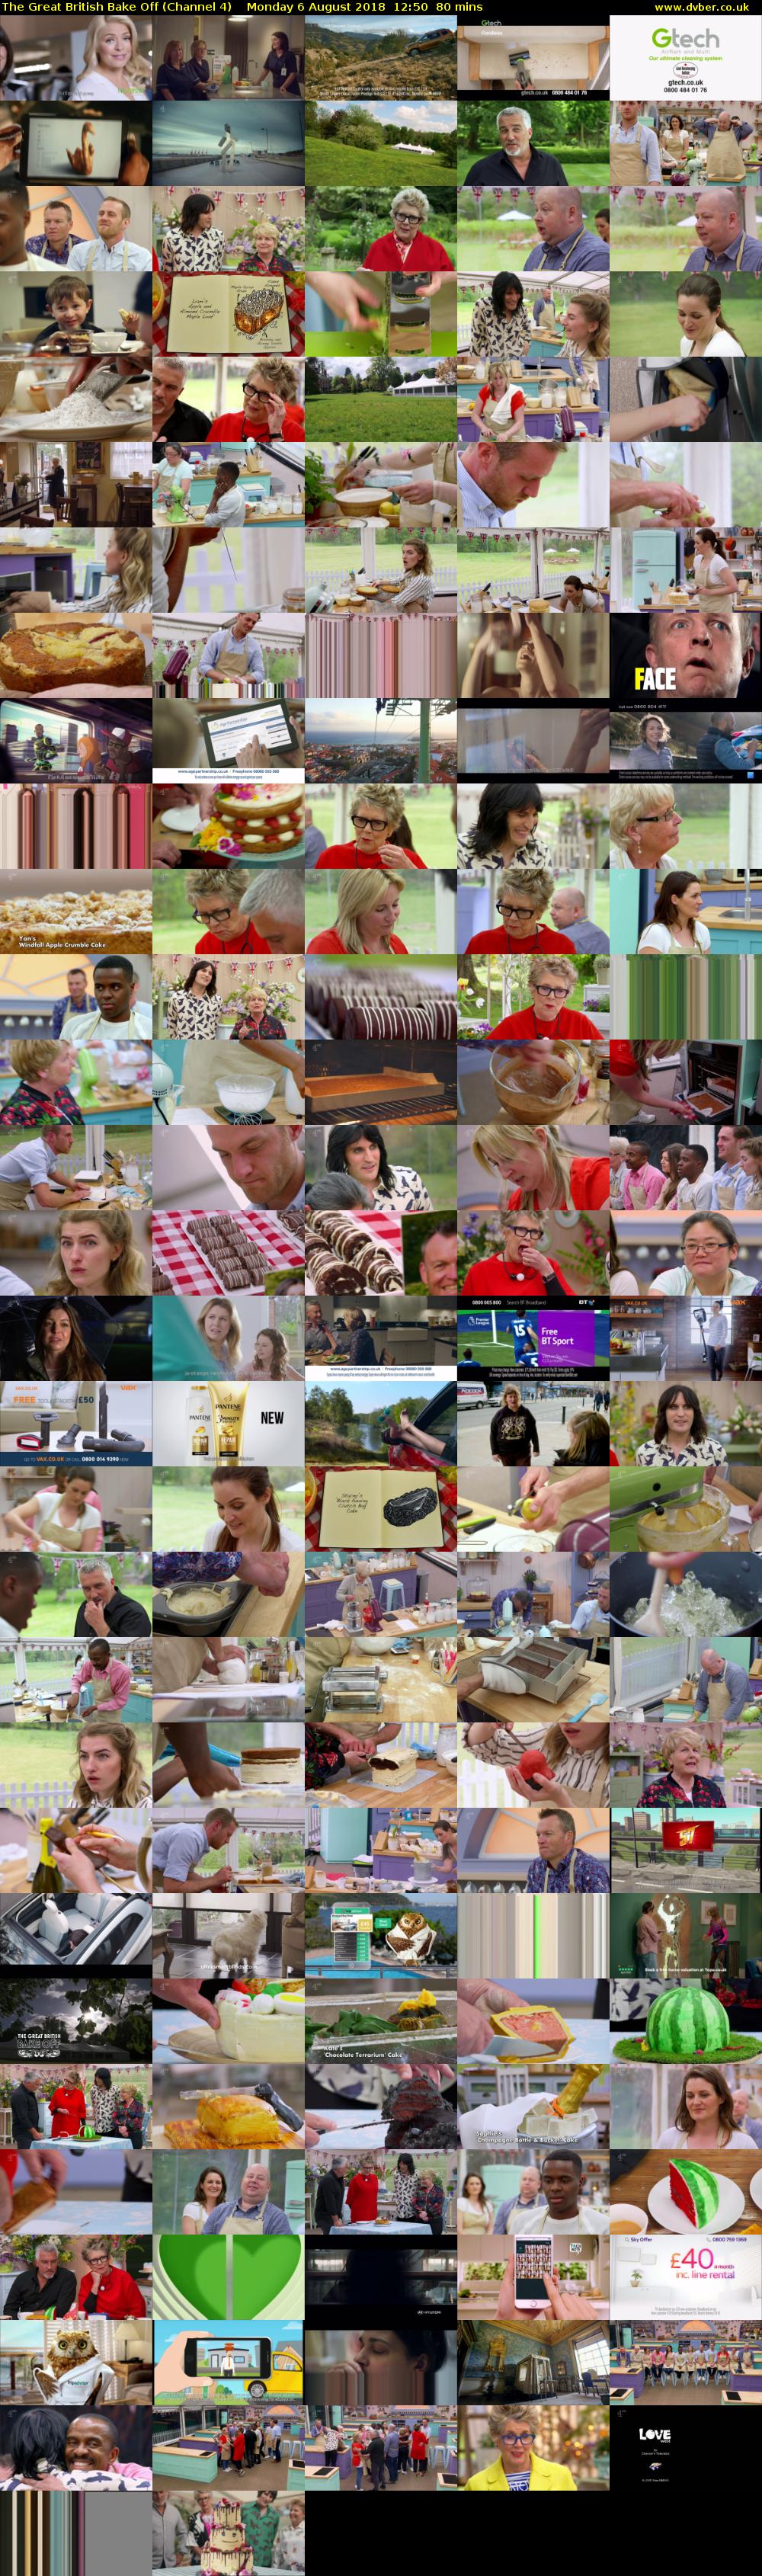 The Great British Bake Off (Channel 4) Monday 6 August 2018 12:50 - 14:10